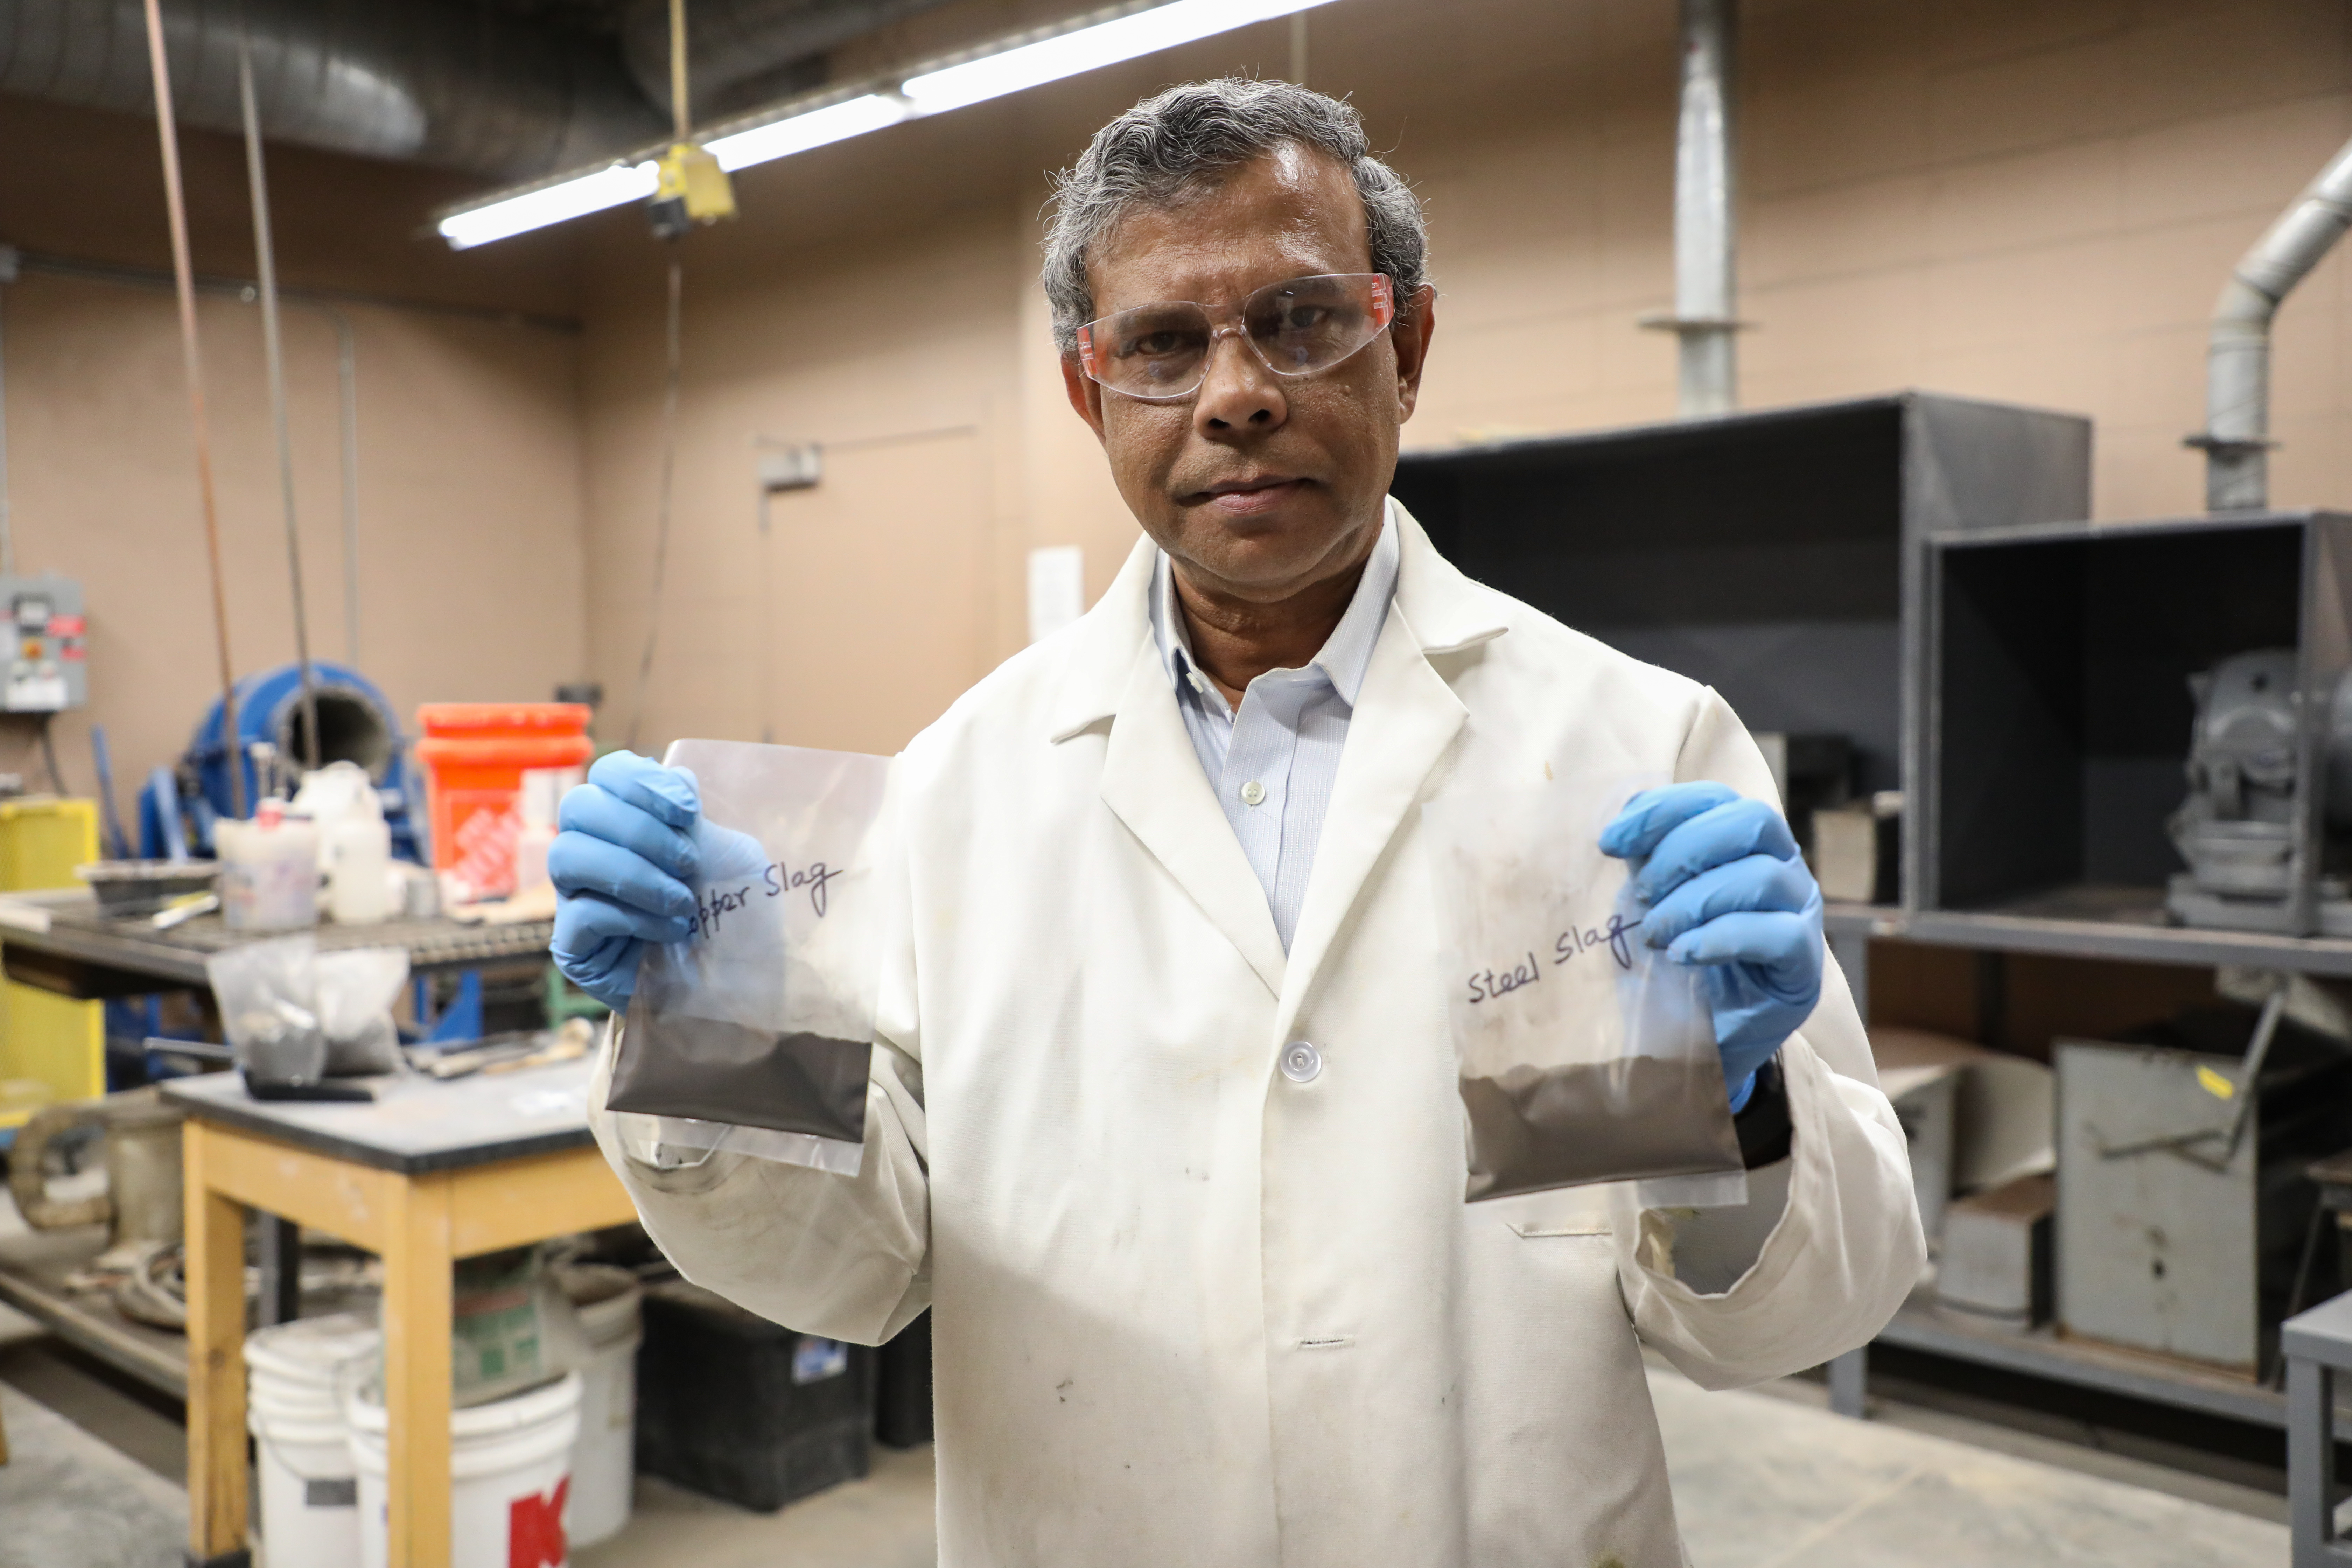 !Professor Das holds two see-through baggies, one marked "copper slag" the other marked "steel slag."